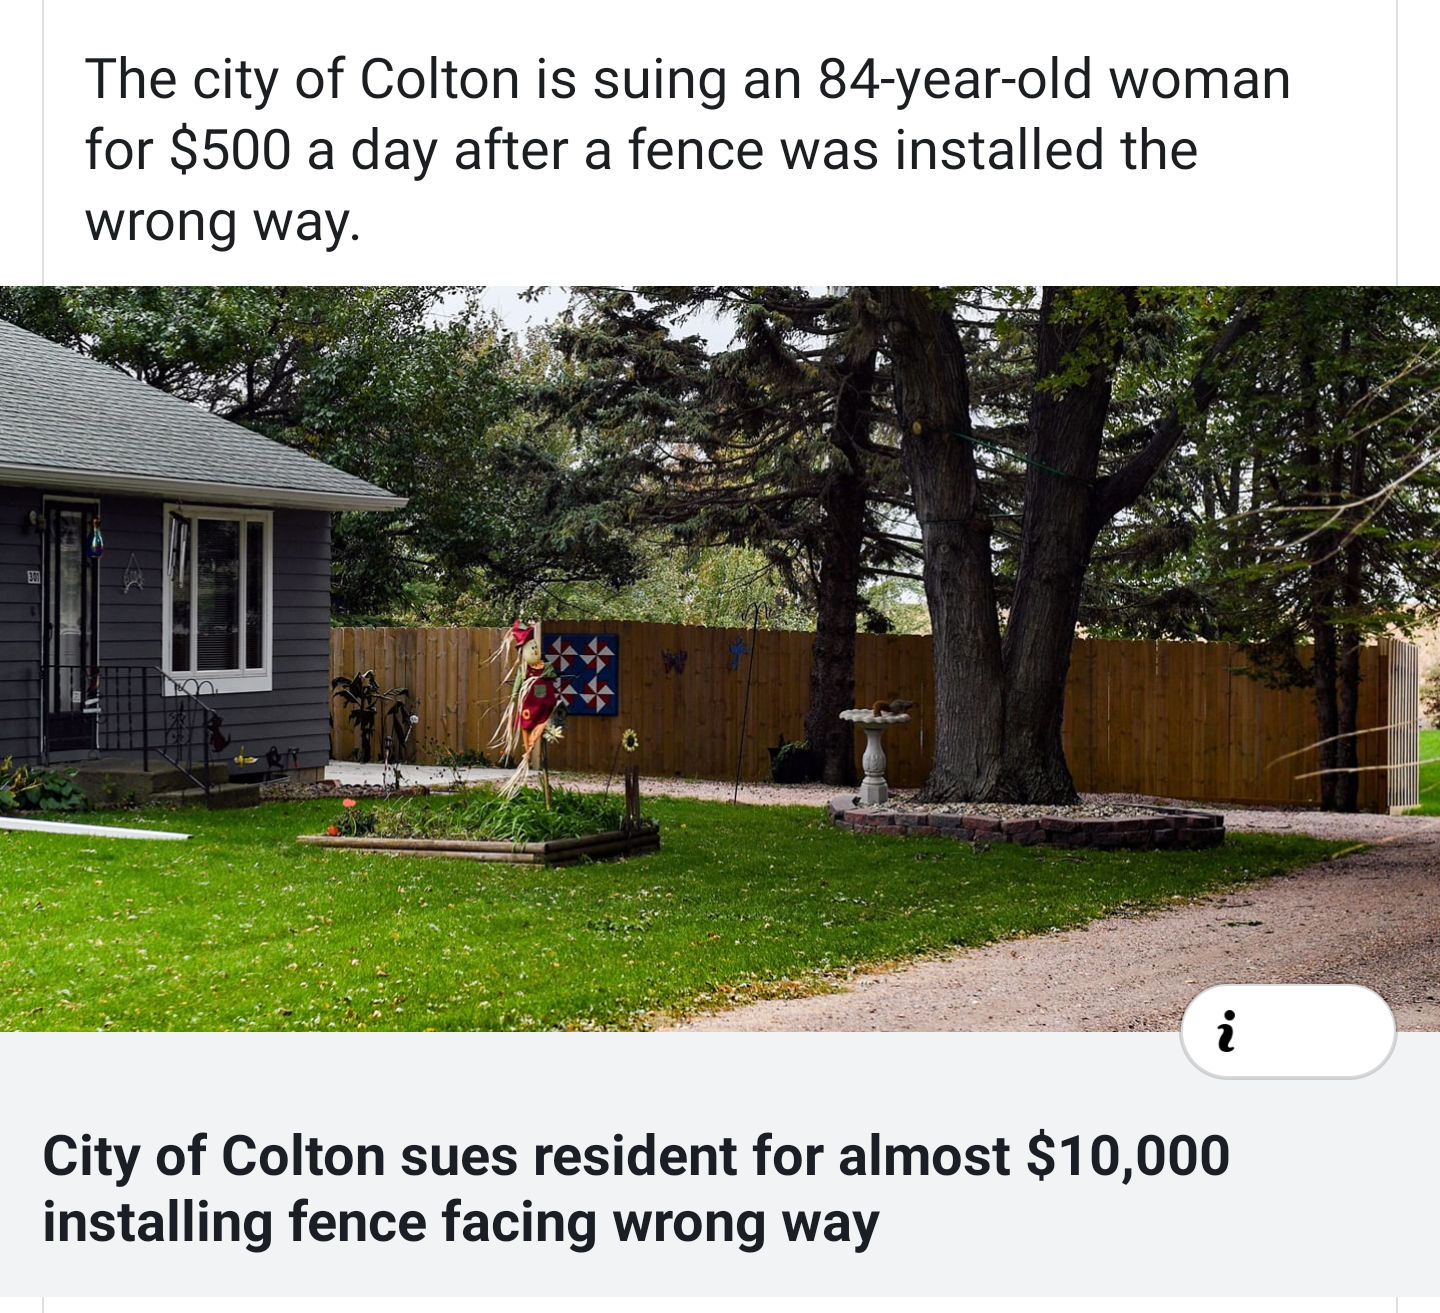 yard - The city of Colton is suing an 84yearold woman for $500 a day after a fence was installed the wrong way. City of Colton sues resident for almost $10,000 installing fence facing wrong way